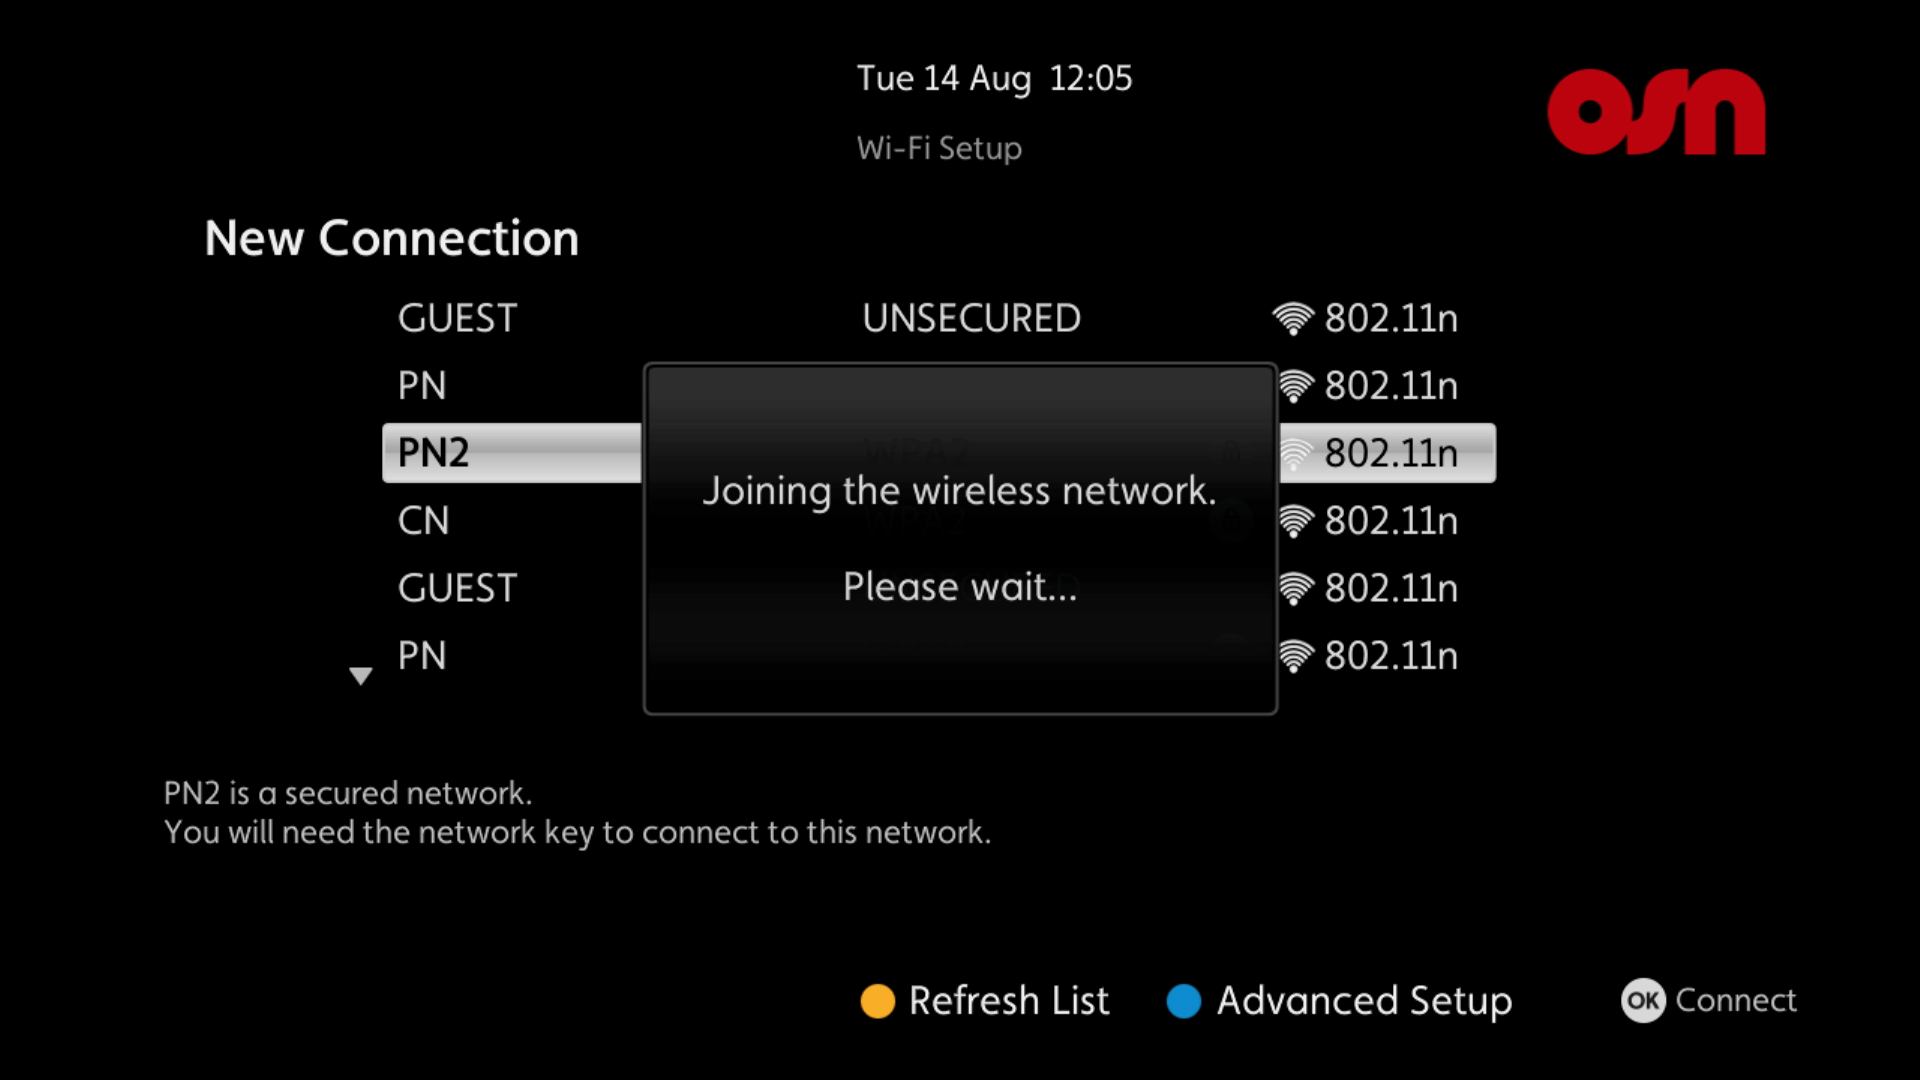 Joining the Wi-Fi network